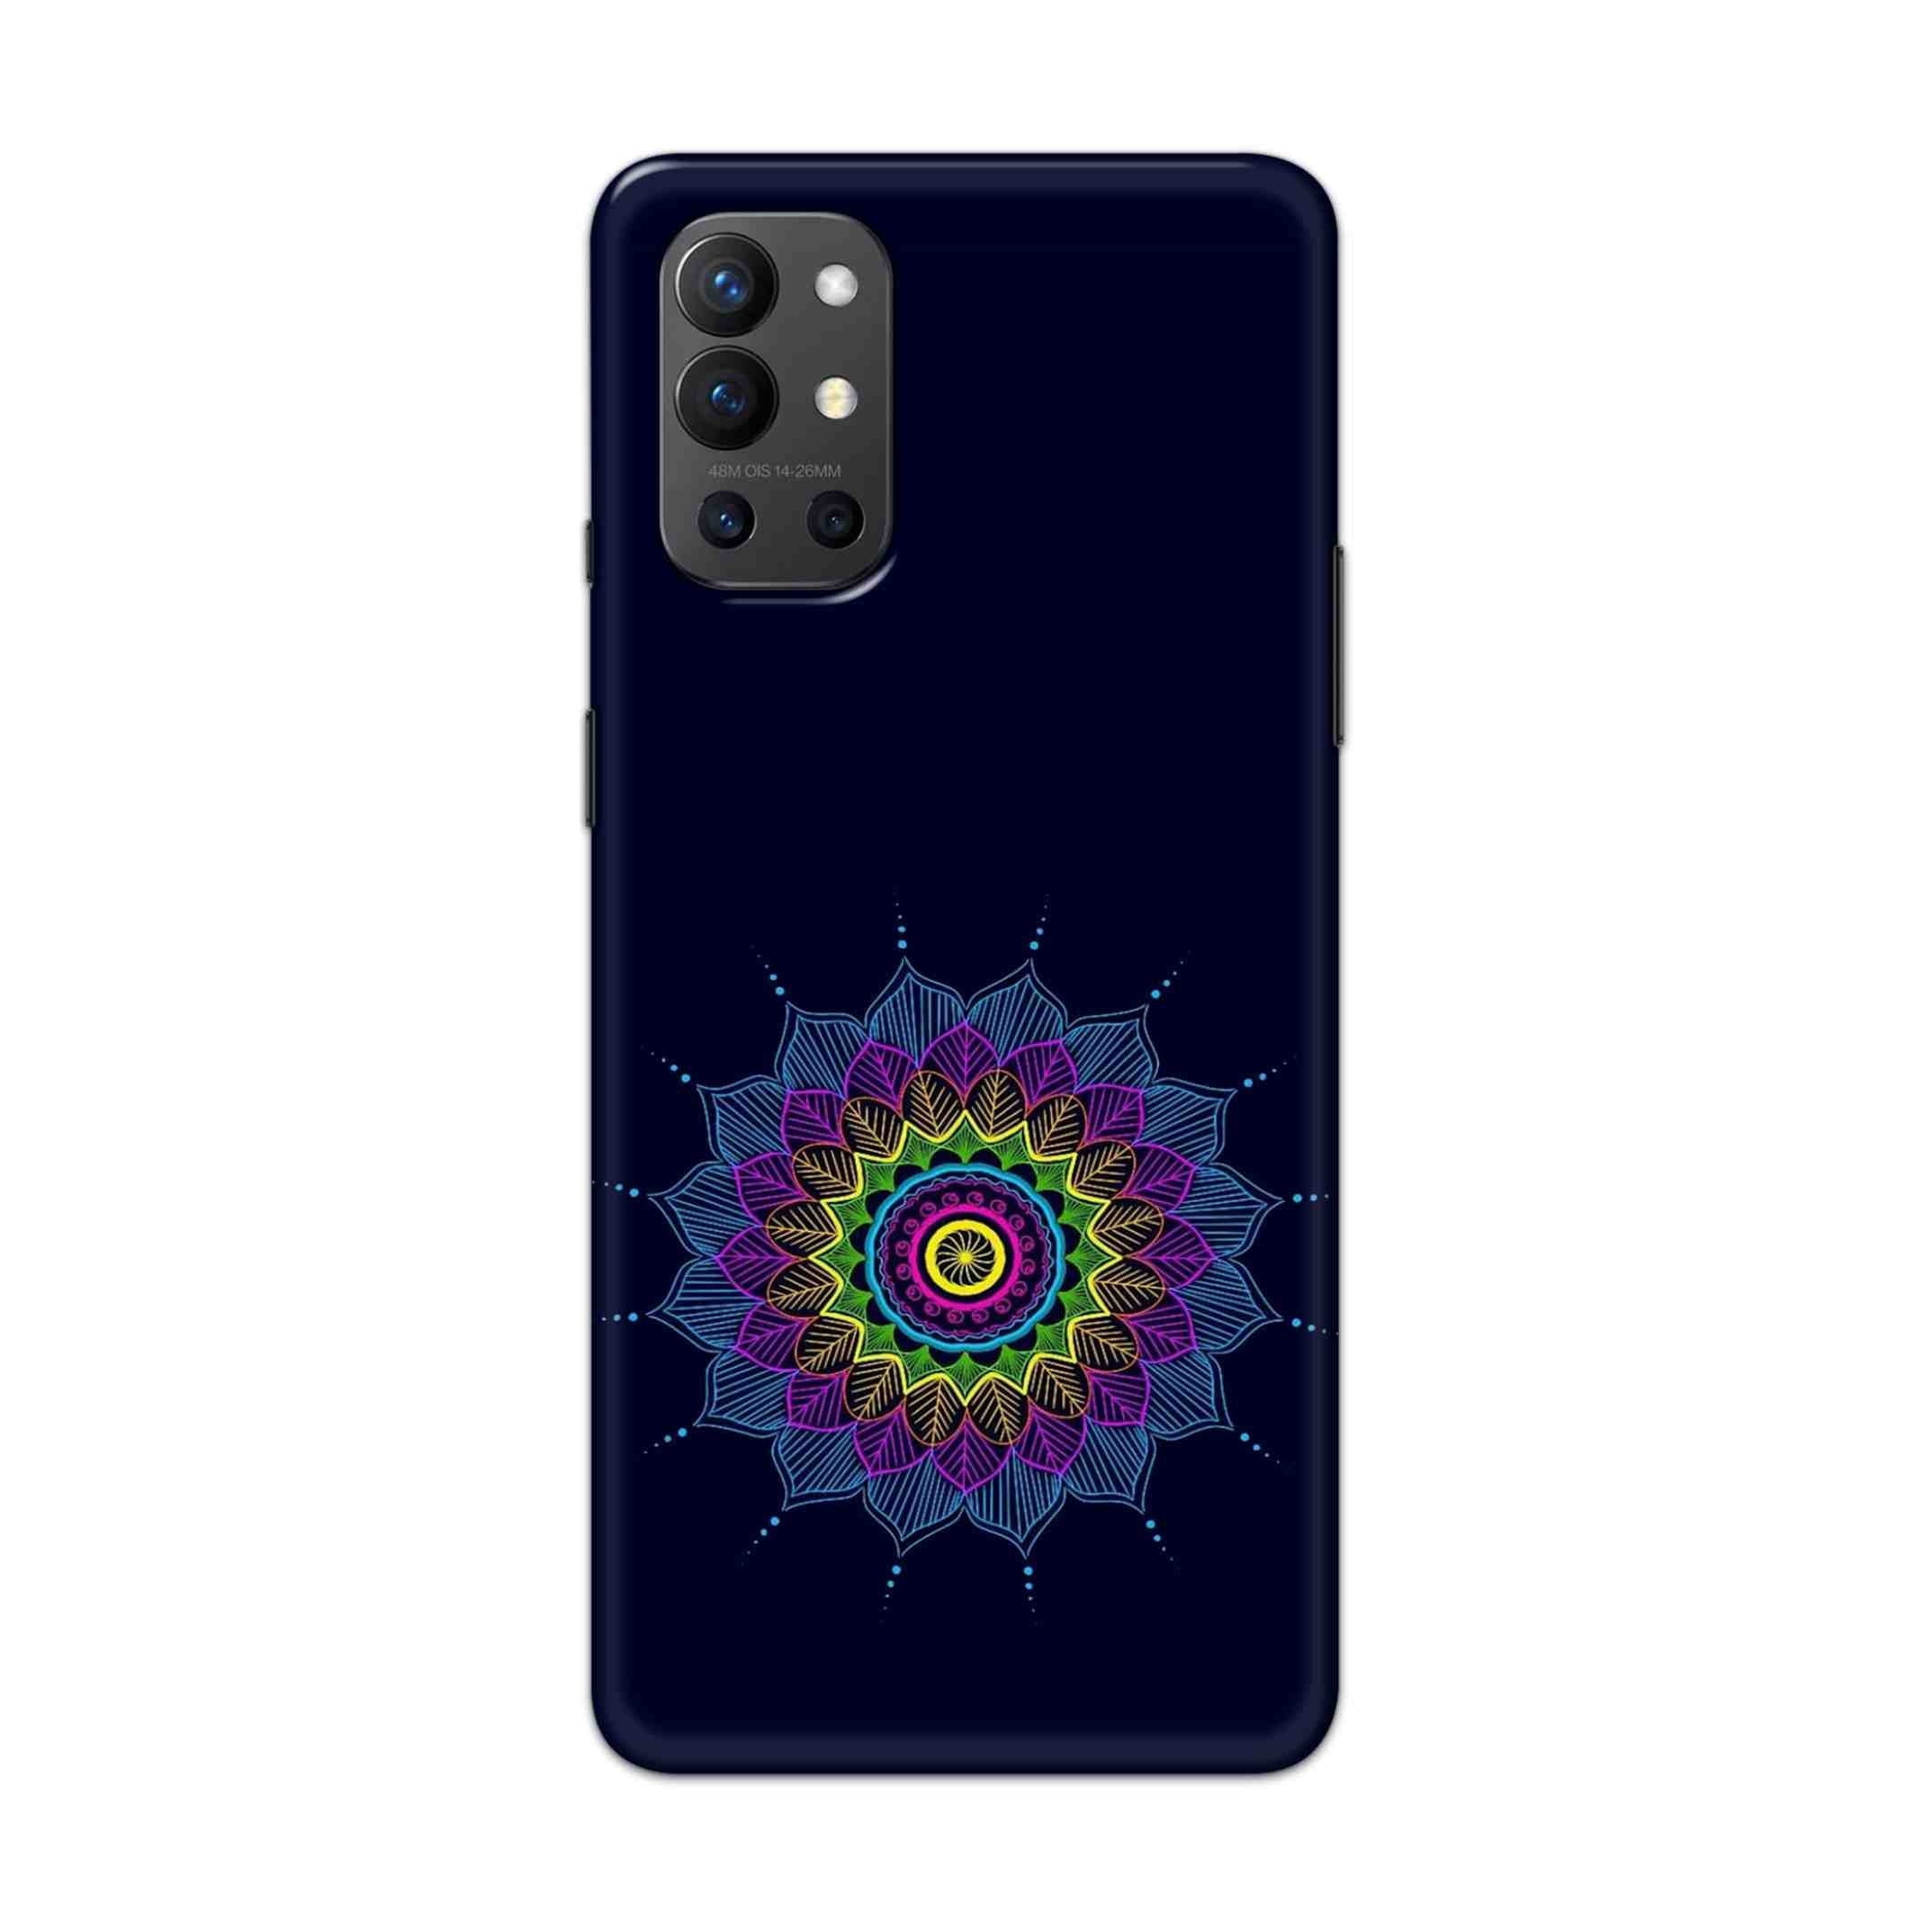 Buy Jung And Mandalas Hard Back Mobile Phone Case Cover For OnePlus 9R / 8T Online